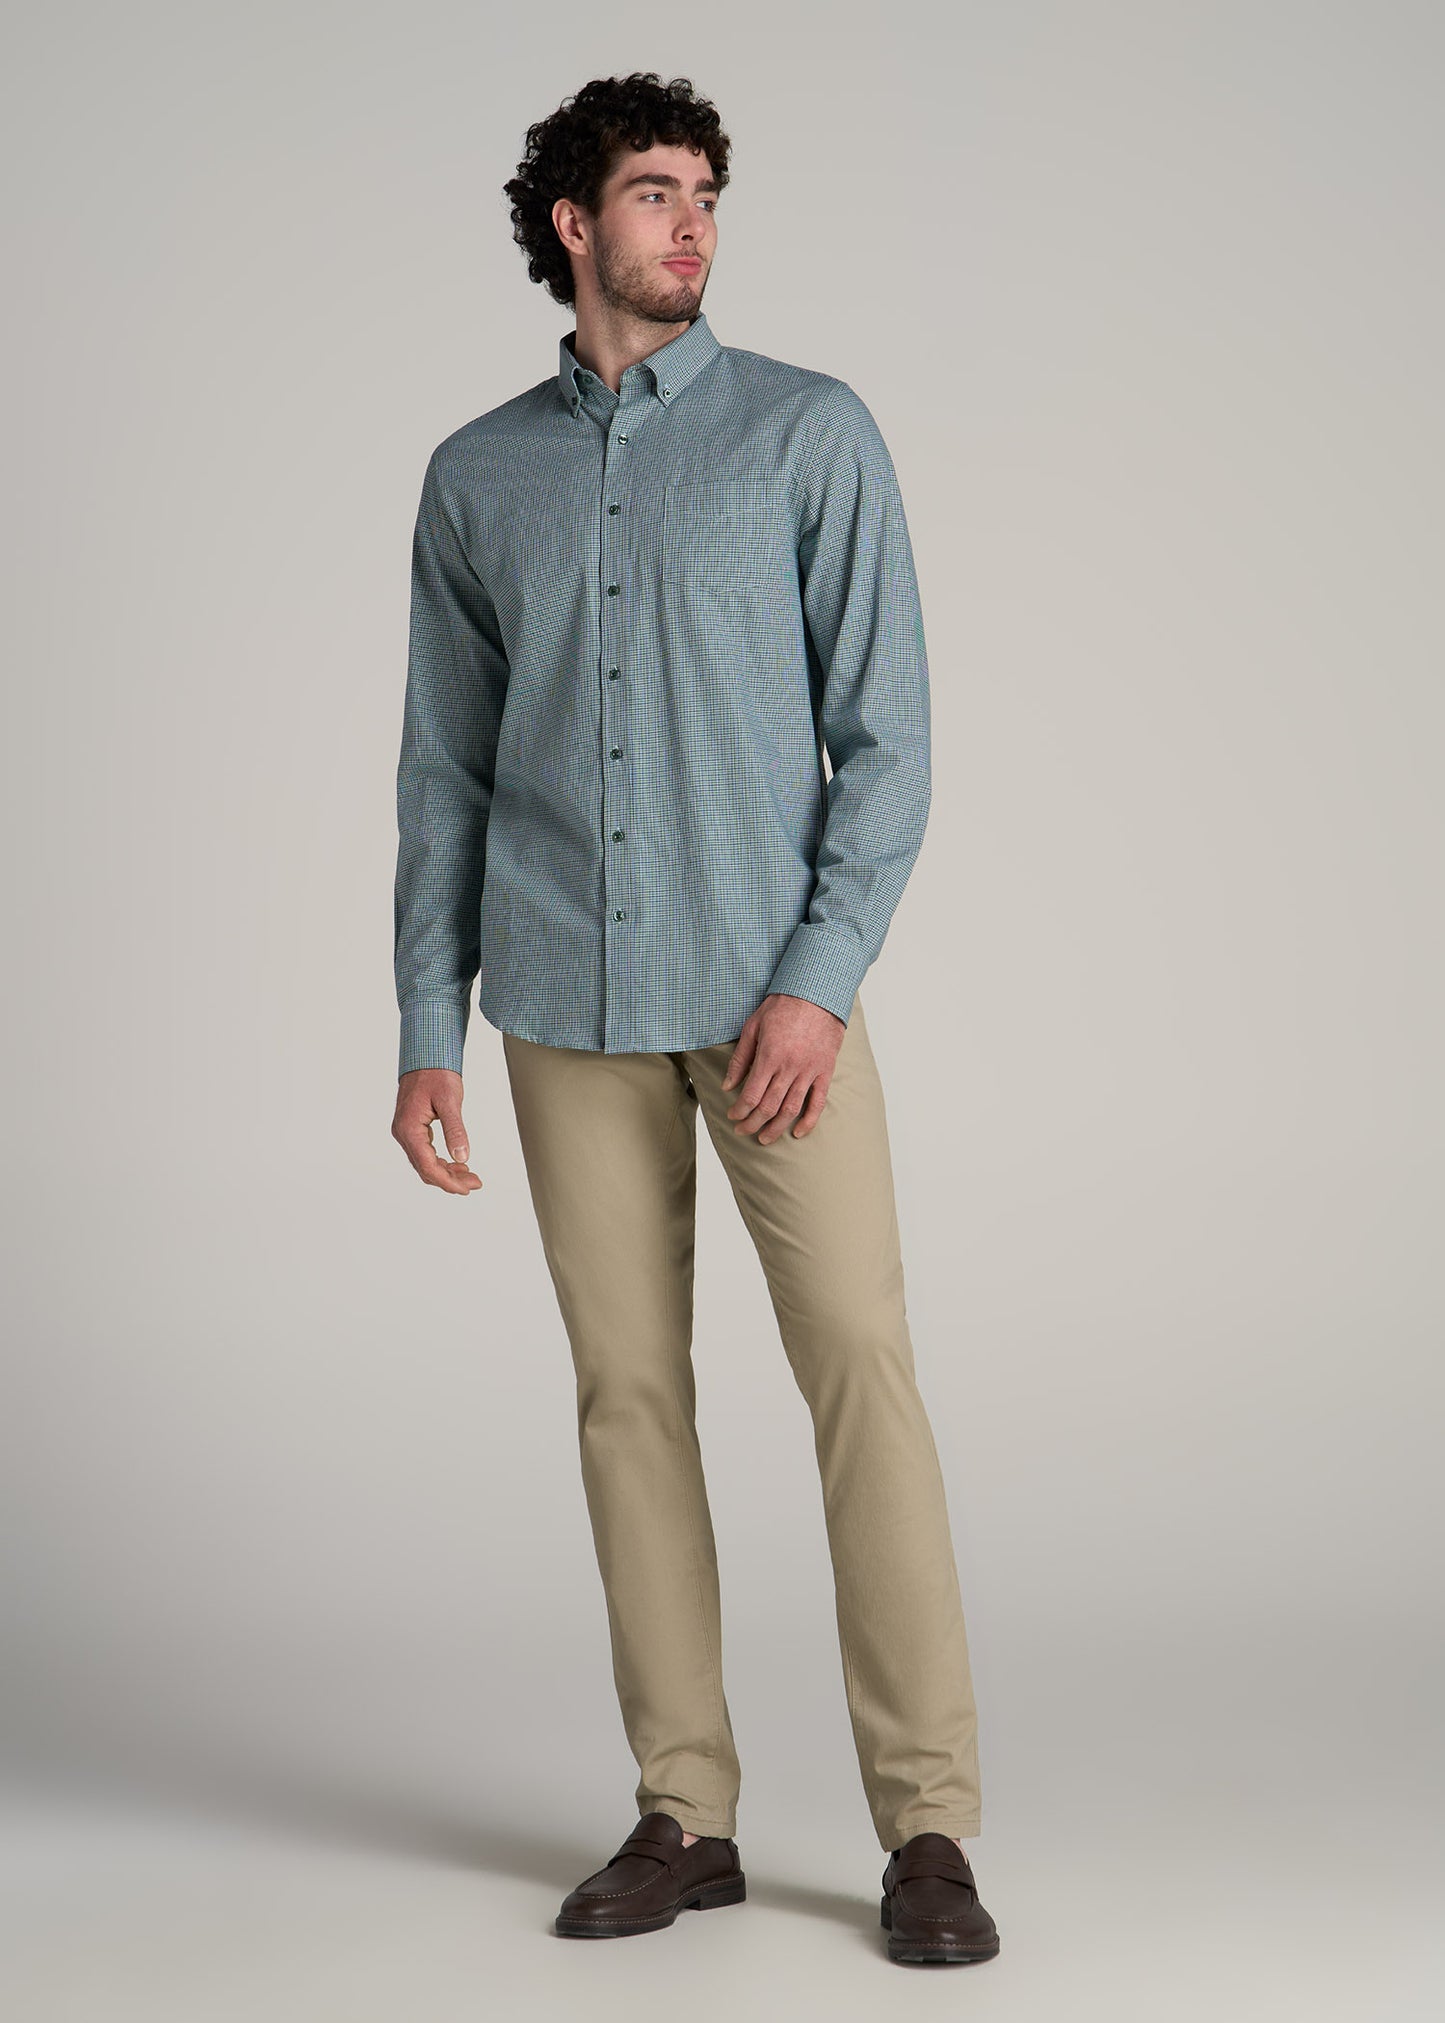 Soft-Wash Button-Up Shirt for Tall Men in Green and Navy Houndstooth